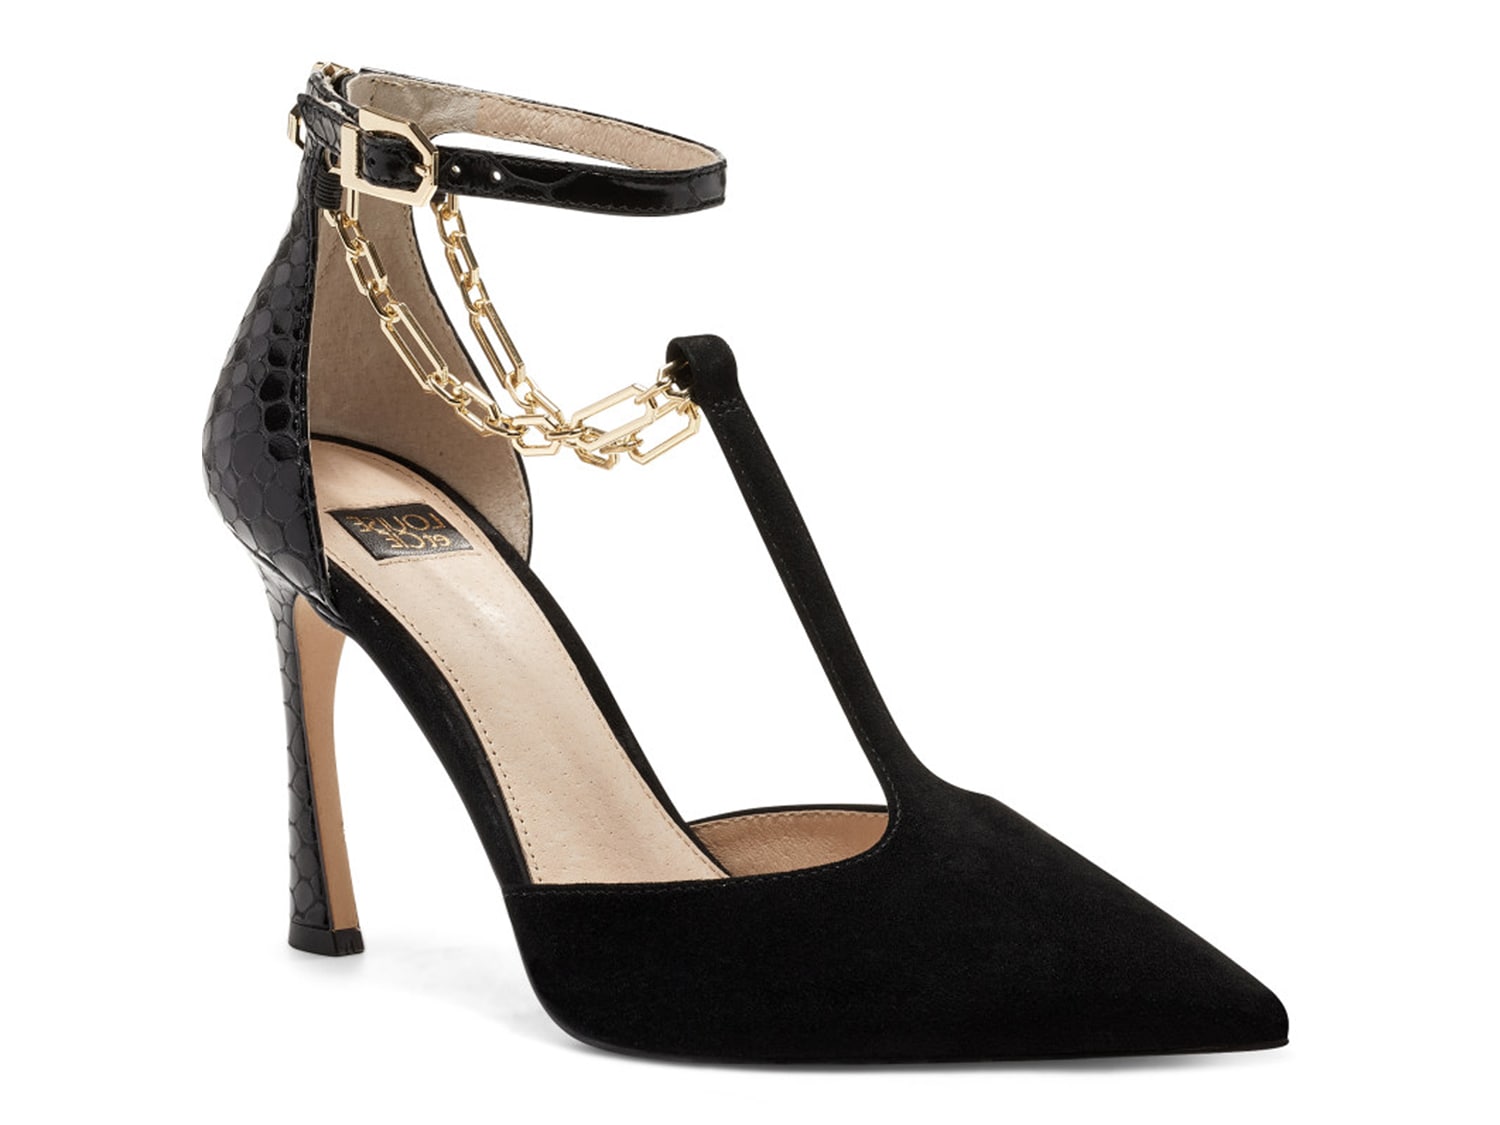 Louise et Cie - It's all in the details: the Jena strappy pointed